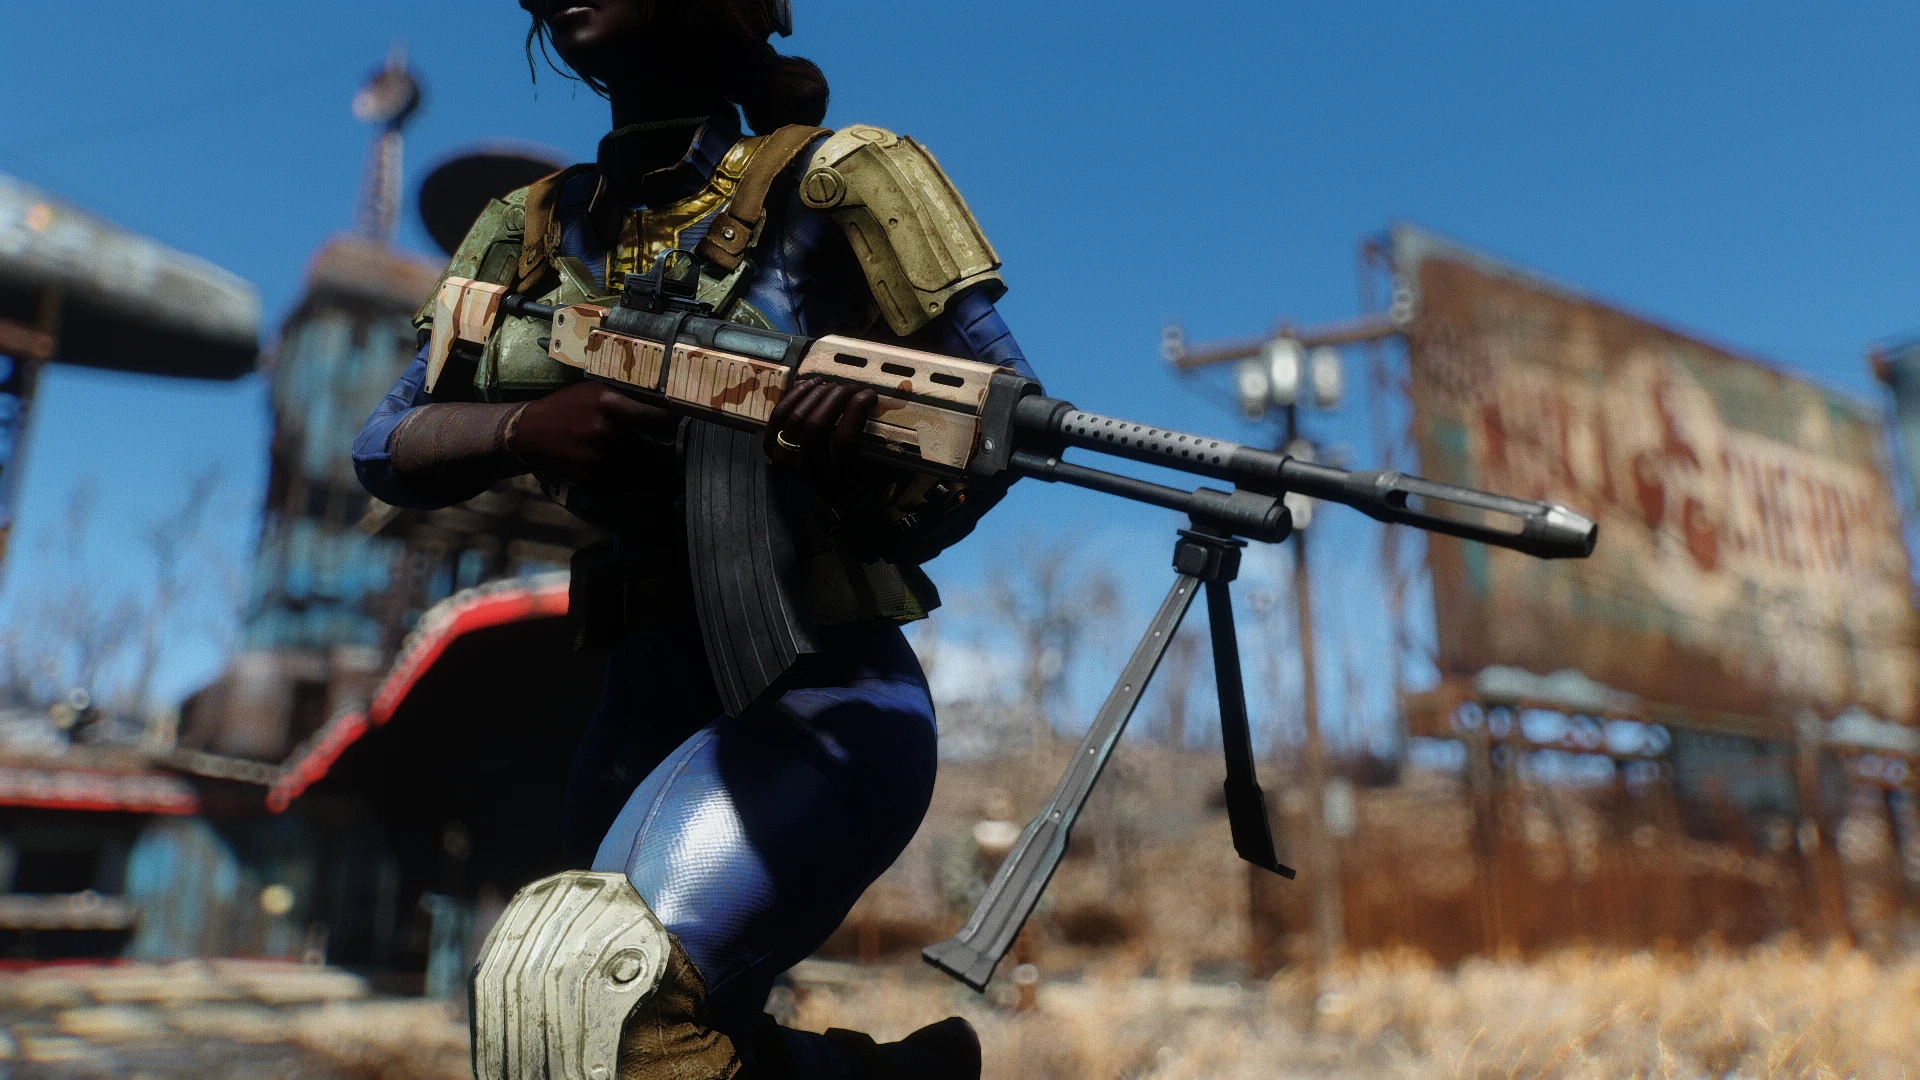 Skibadaa weapon pack at fallout 4 фото 10